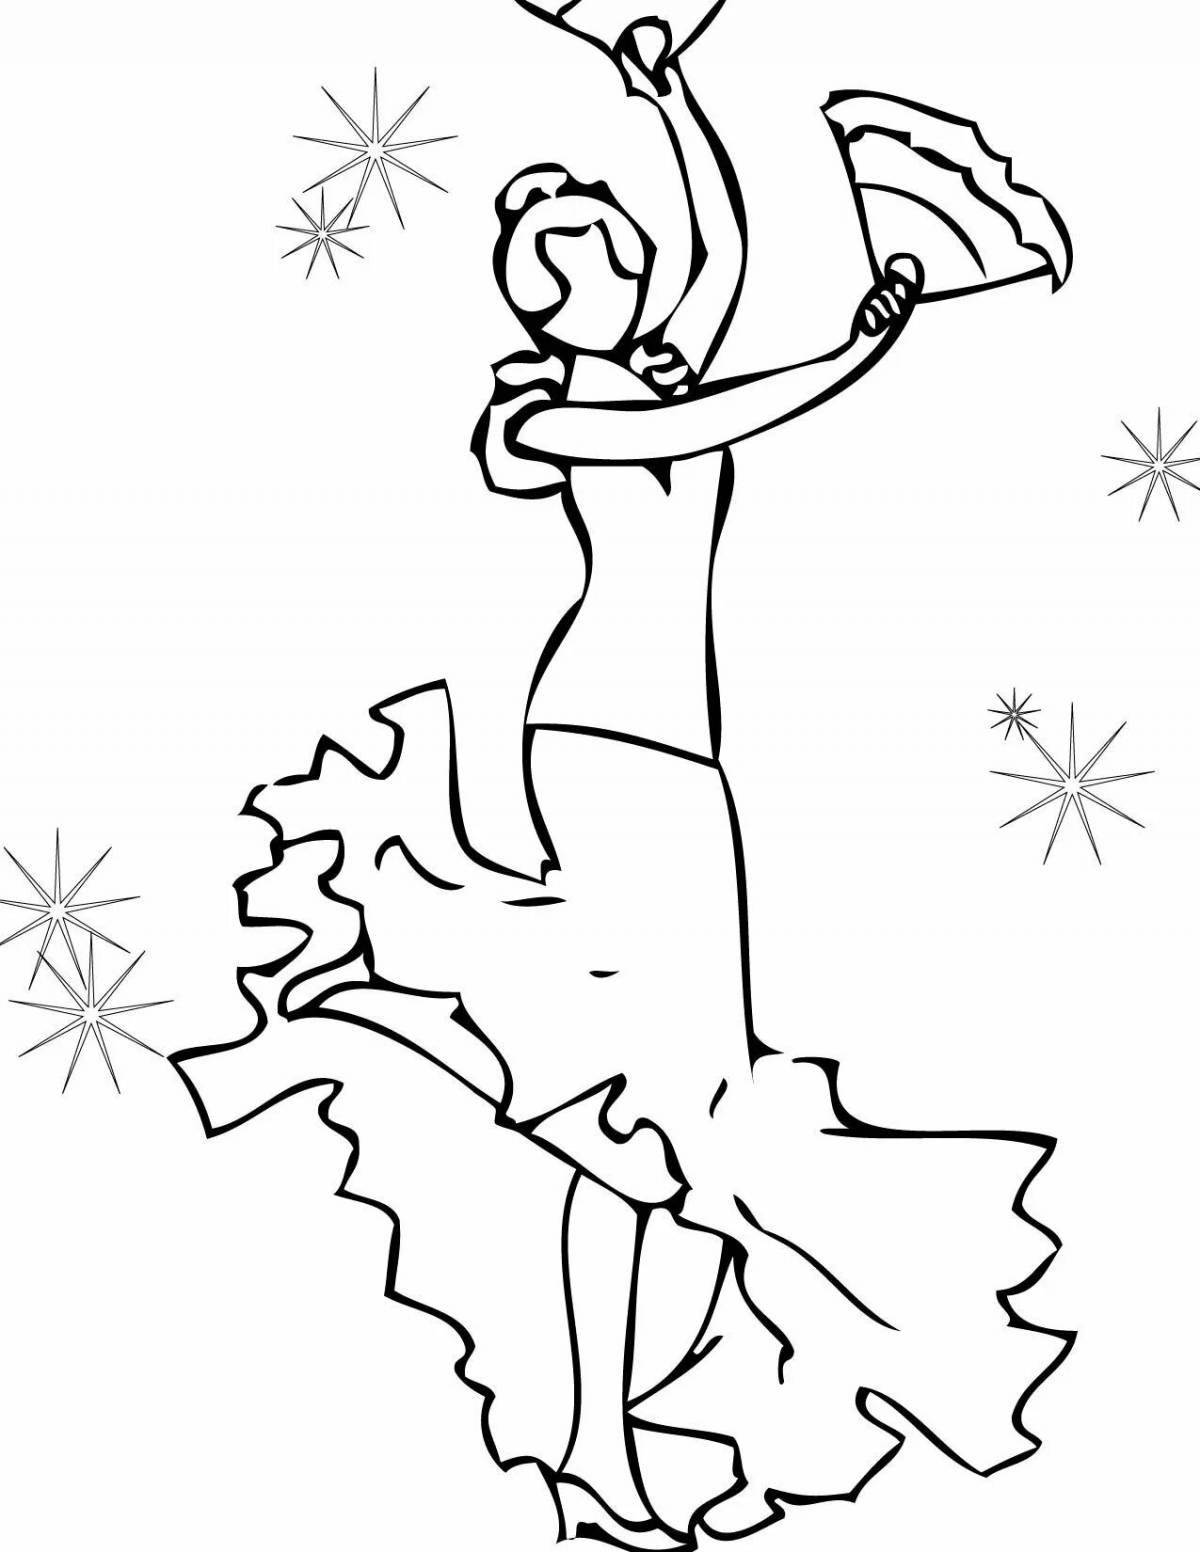 Coloring page beckoning dance